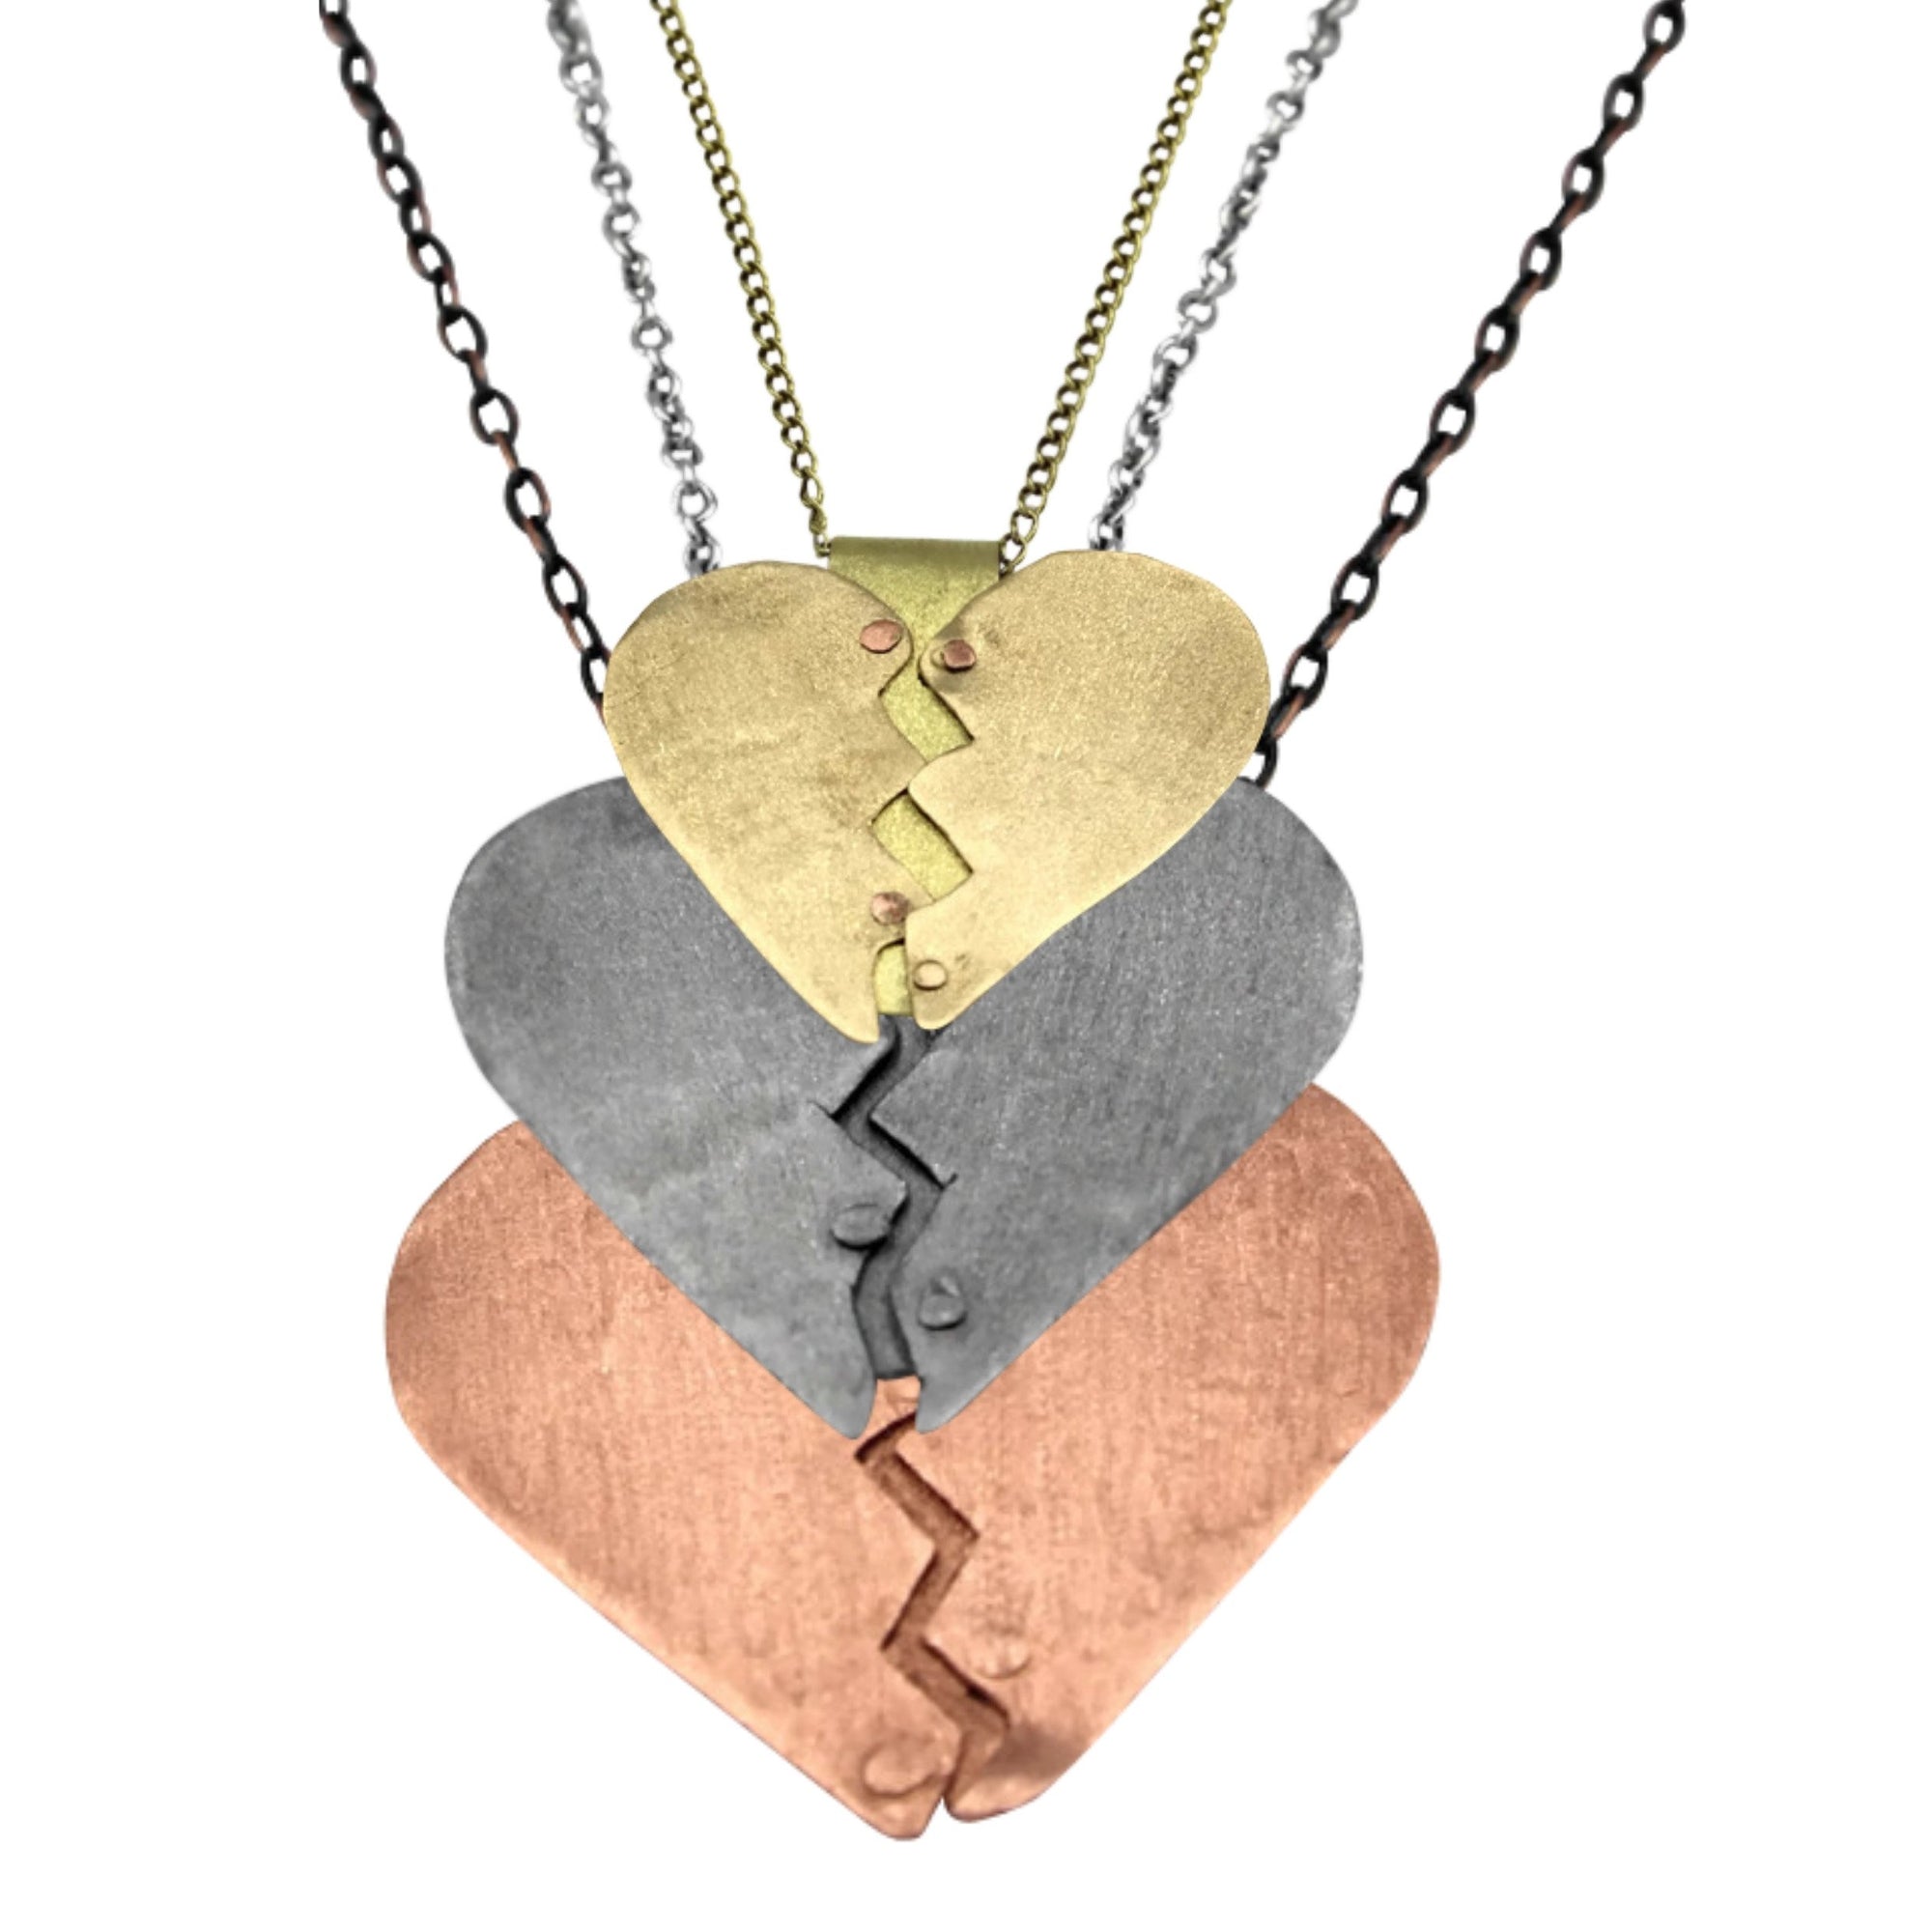 These are my healing heart necklaces. There is a gold heart necklace, silver heart necklace and a copper heart pendant necklace. I made these healing hearts in honor of the survivors and those that didn't from Domestic Violence.